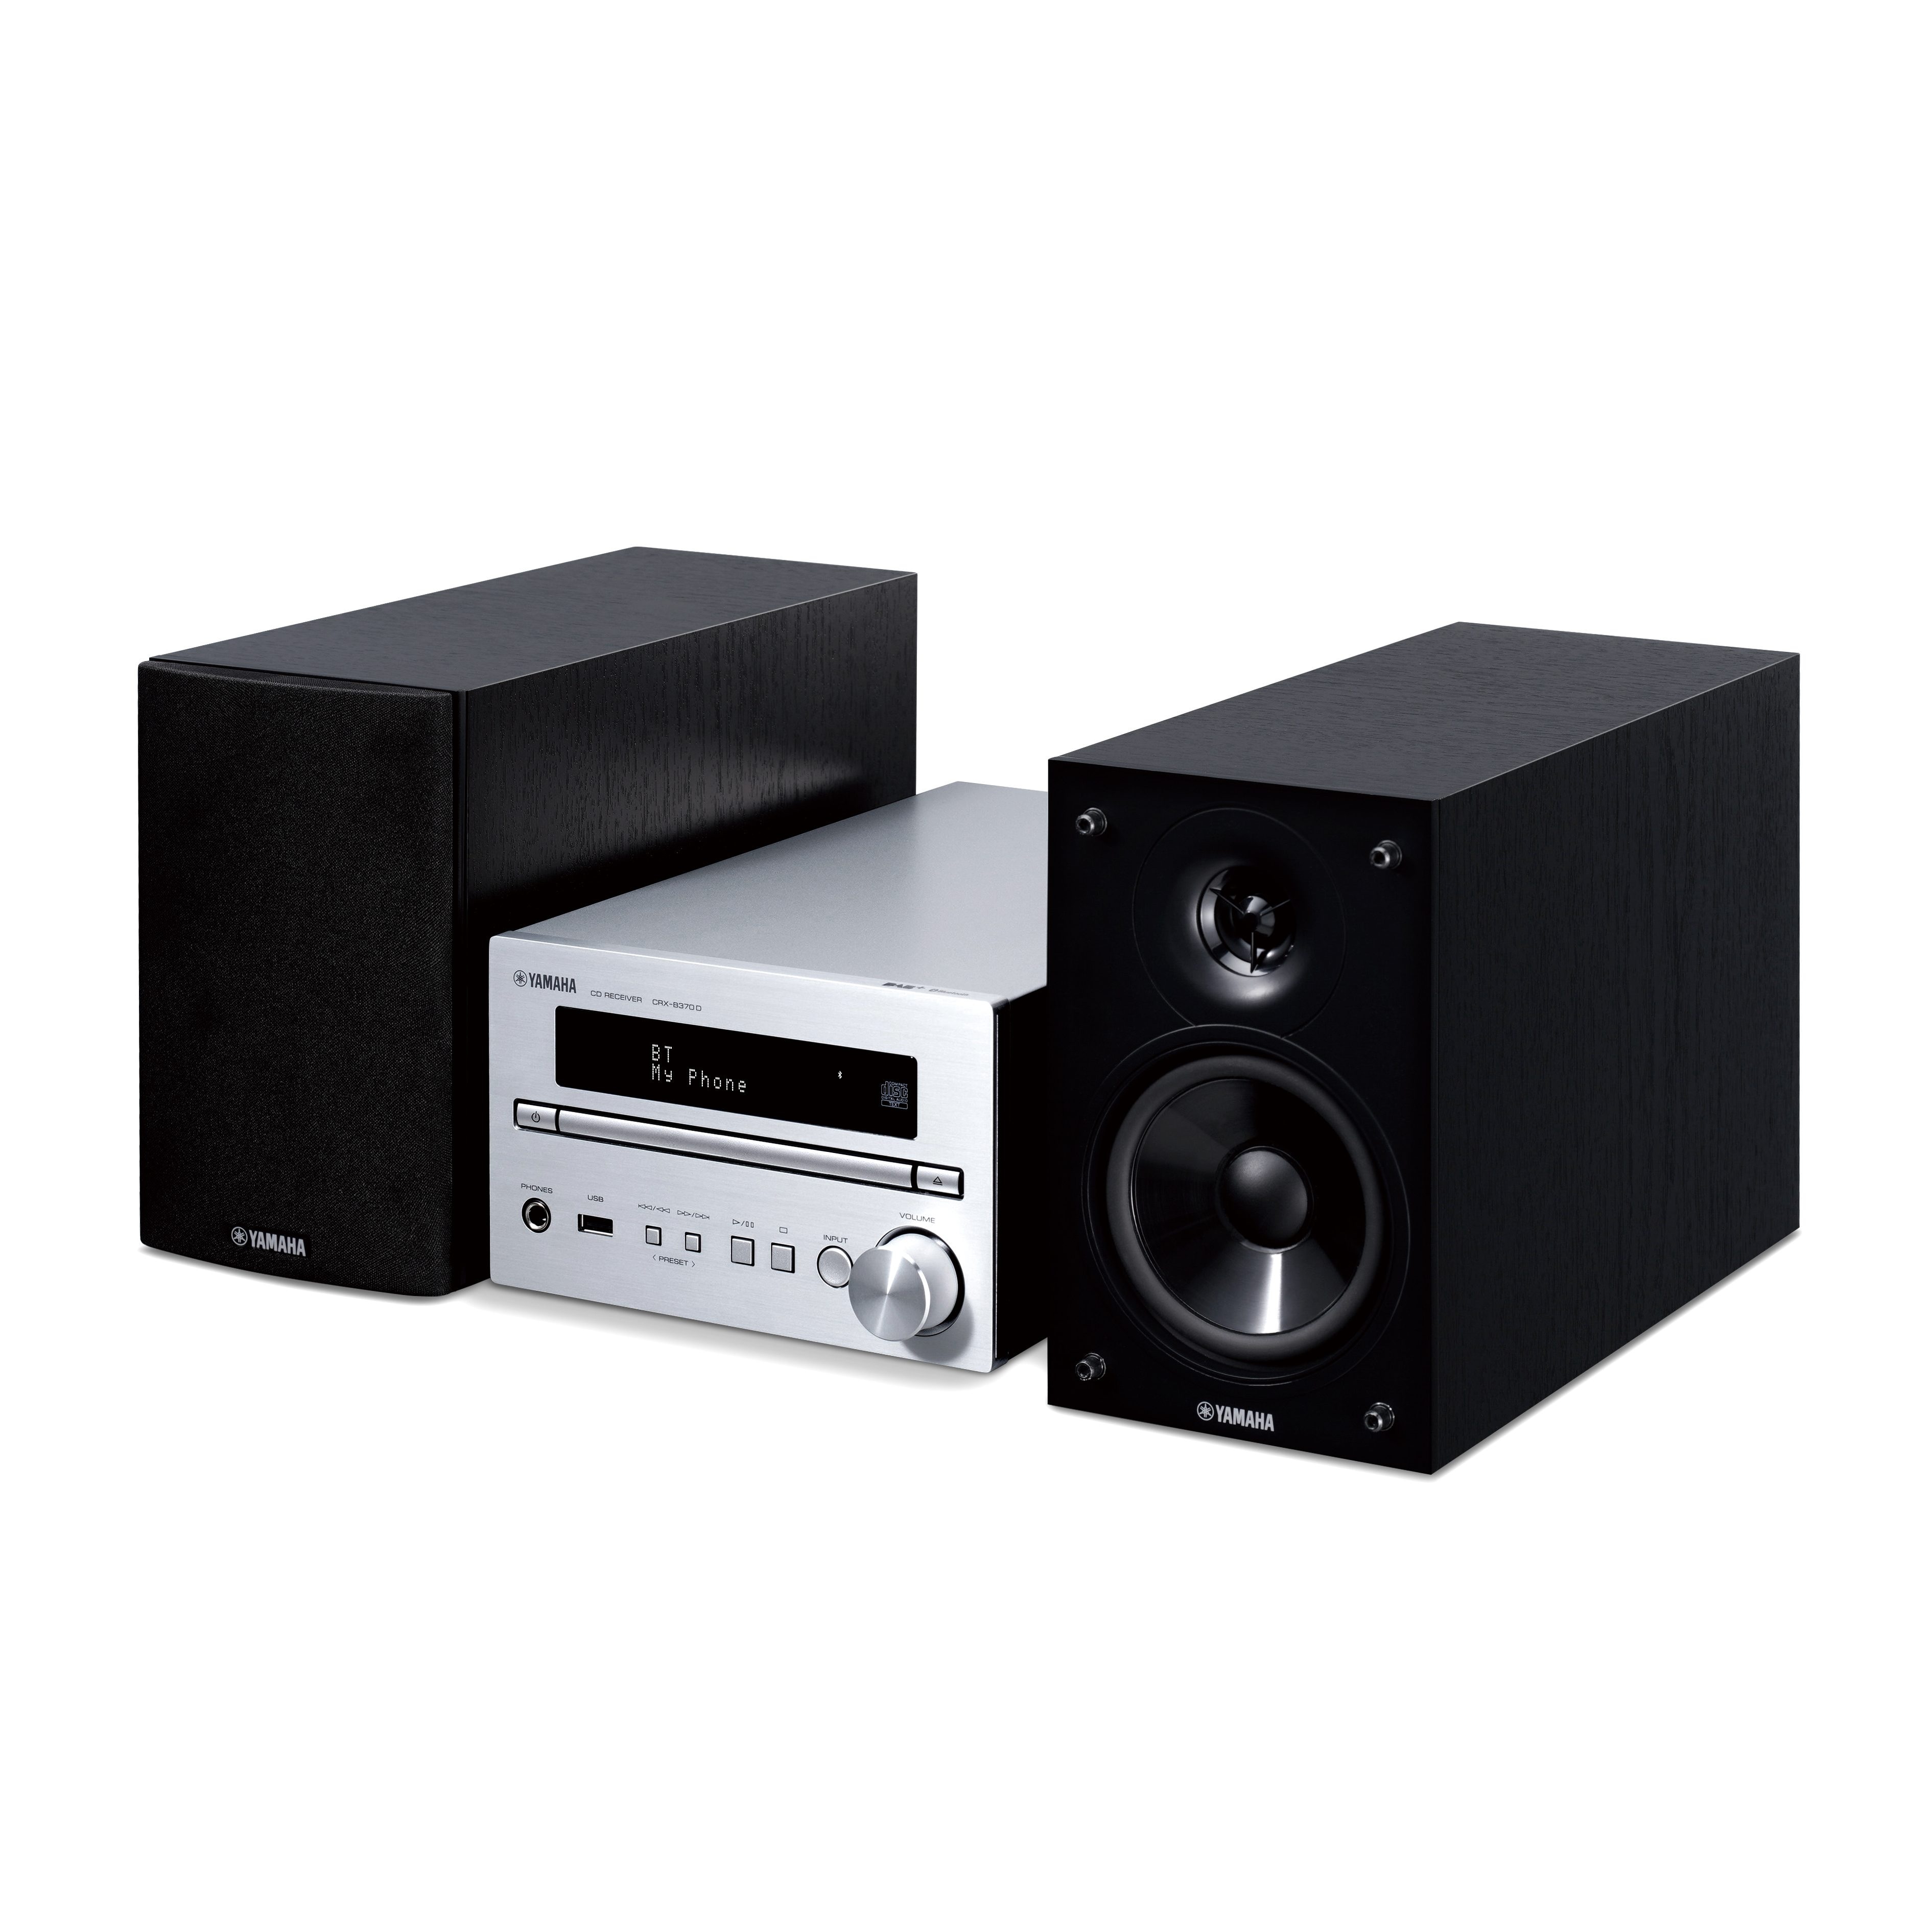 MCR-B270D - Overview - HiFi Audio - Visual Yamaha Products - Systems - Other & Countries - European